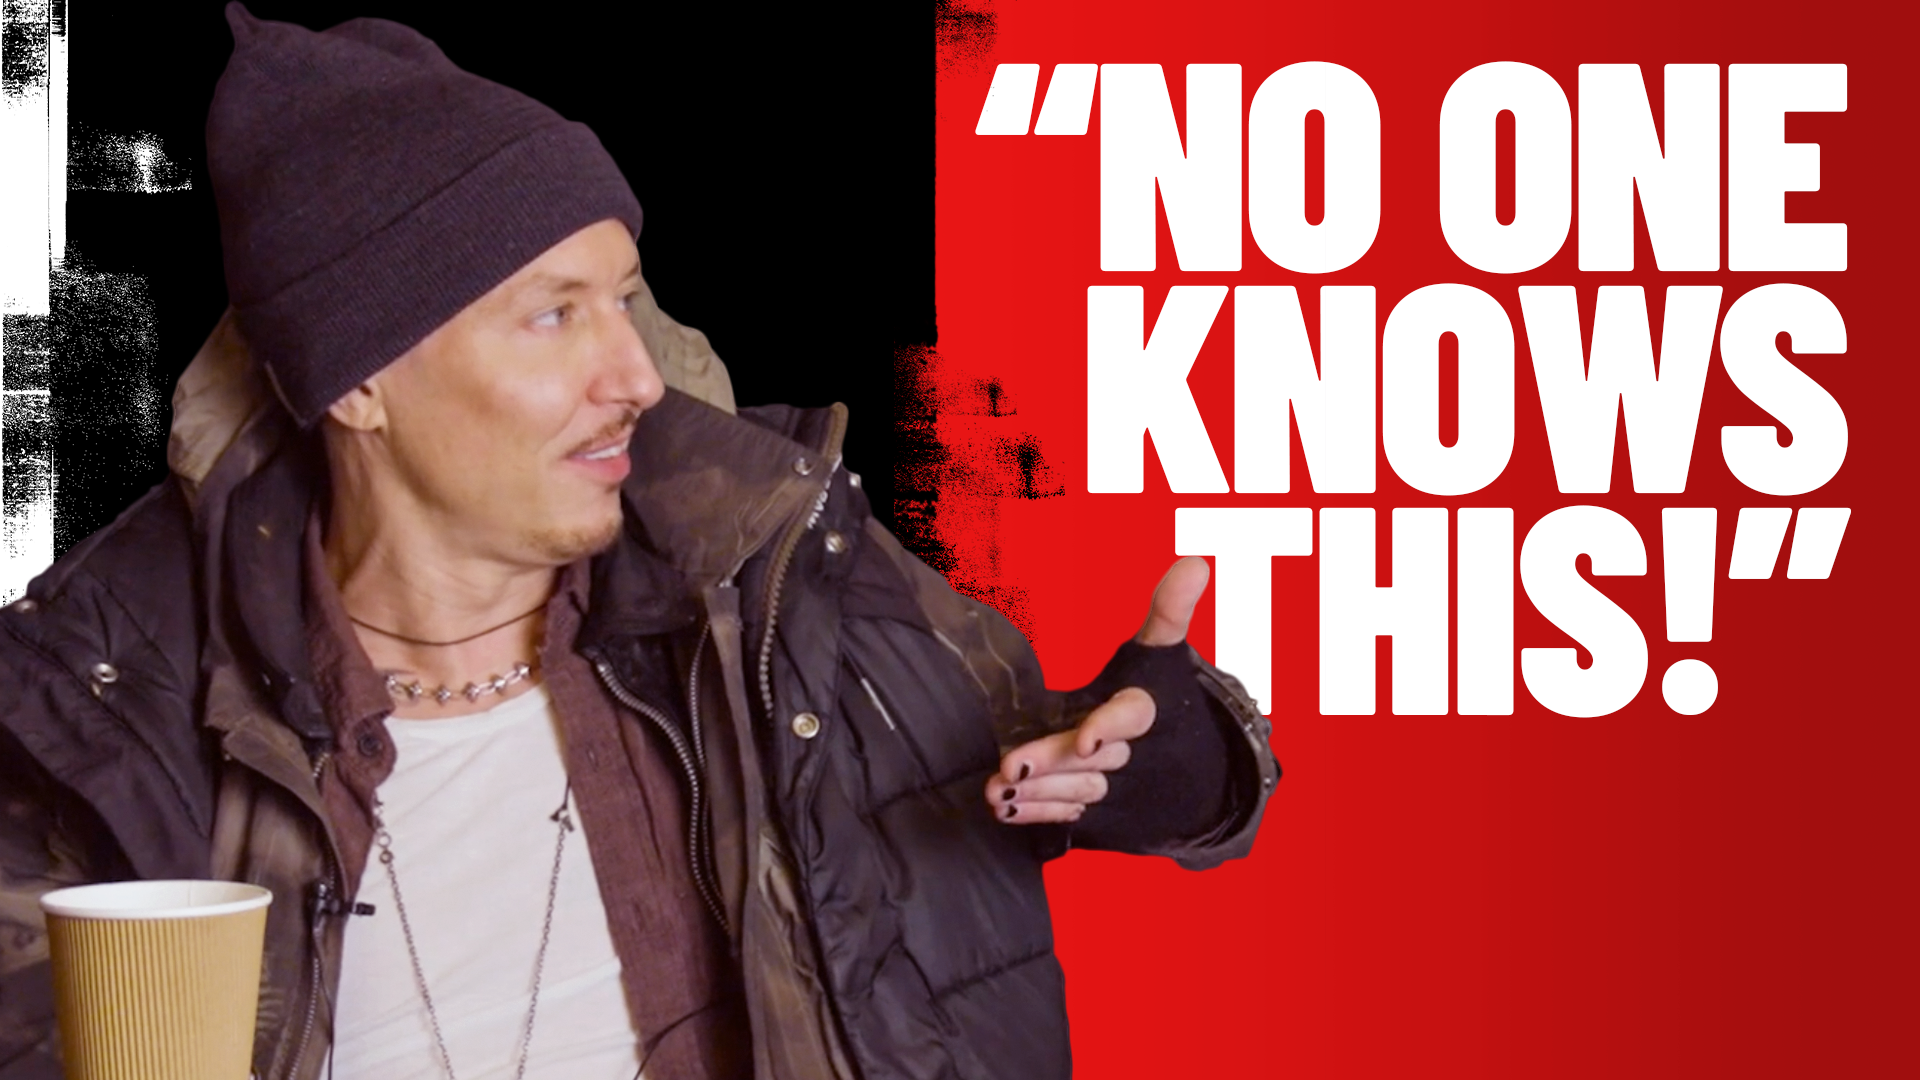 “You’re talking to a person that’s never heard an Iron Maiden record.” Watch Better Lovers frontman and former Dillinger Escape Plan man Greg Puciato take on the most daunting (and ridiculous) metal true or false quiz ever